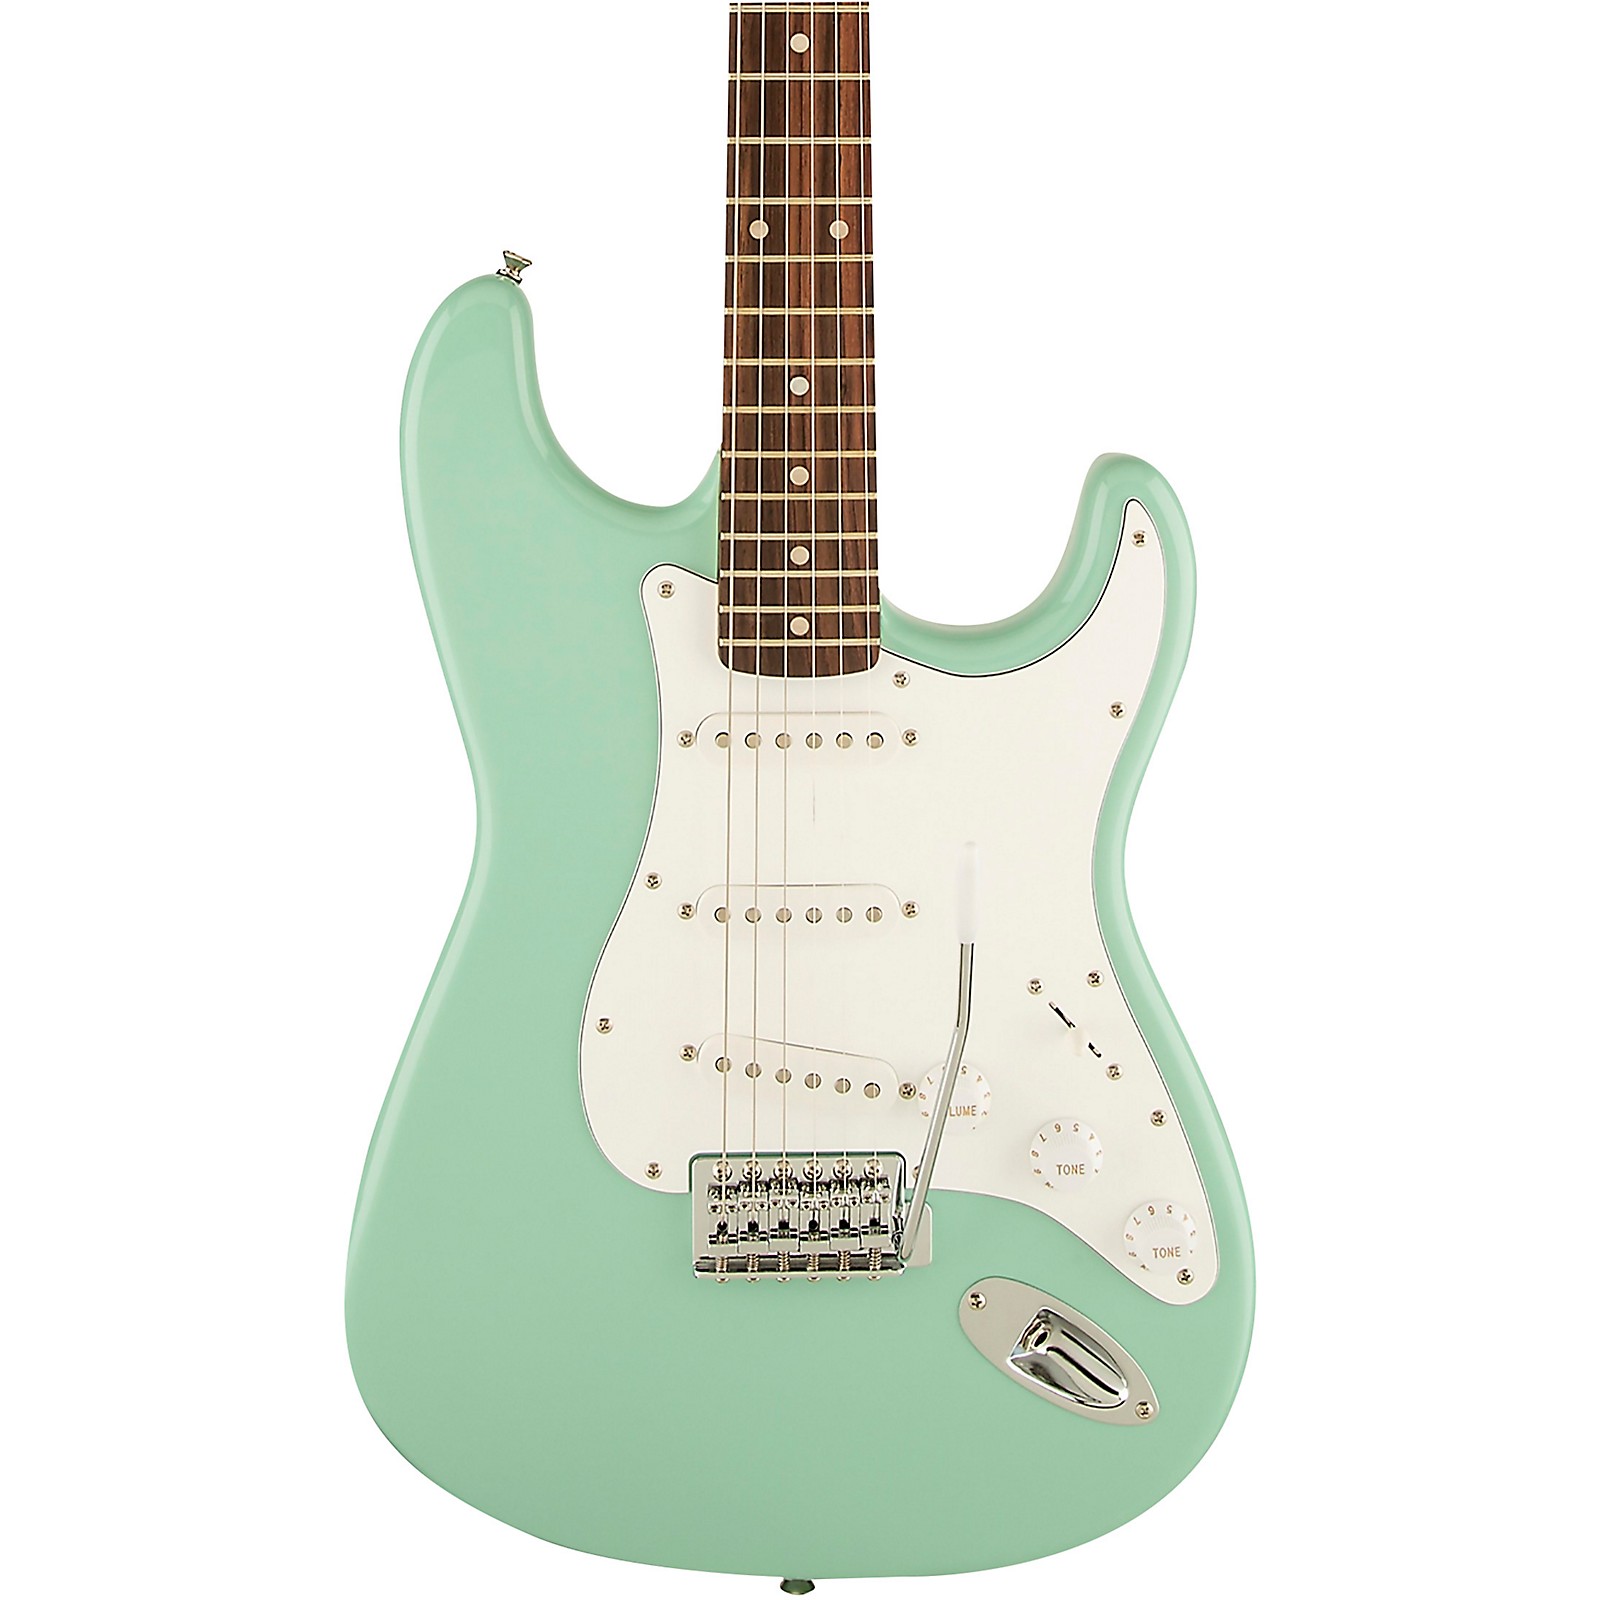 Squier Affinity Stratocaster Electric Guitar Surf Green